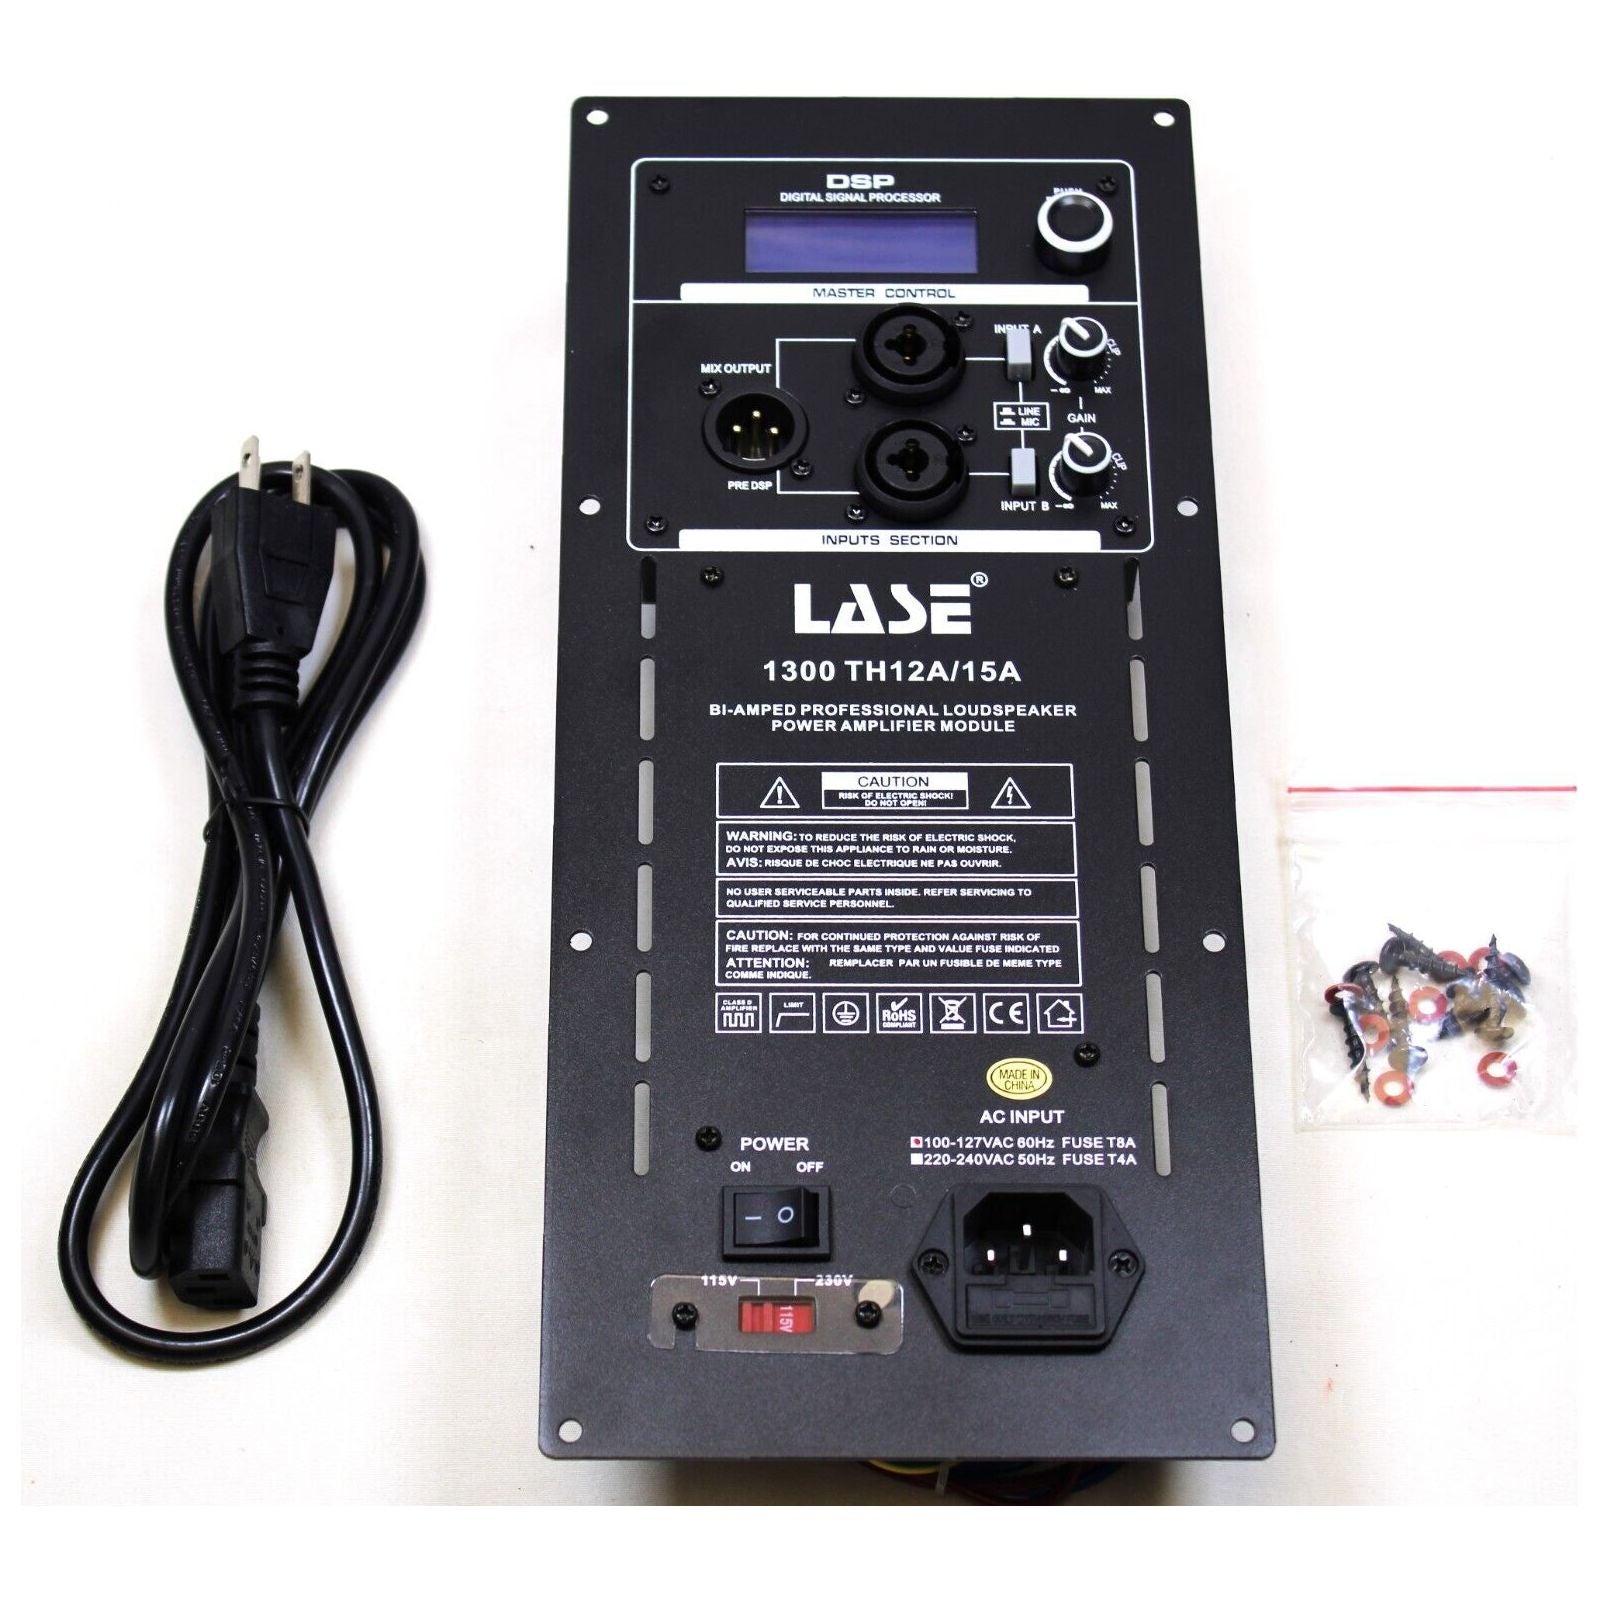 LASE Replacement Mackie Amplifier Modules